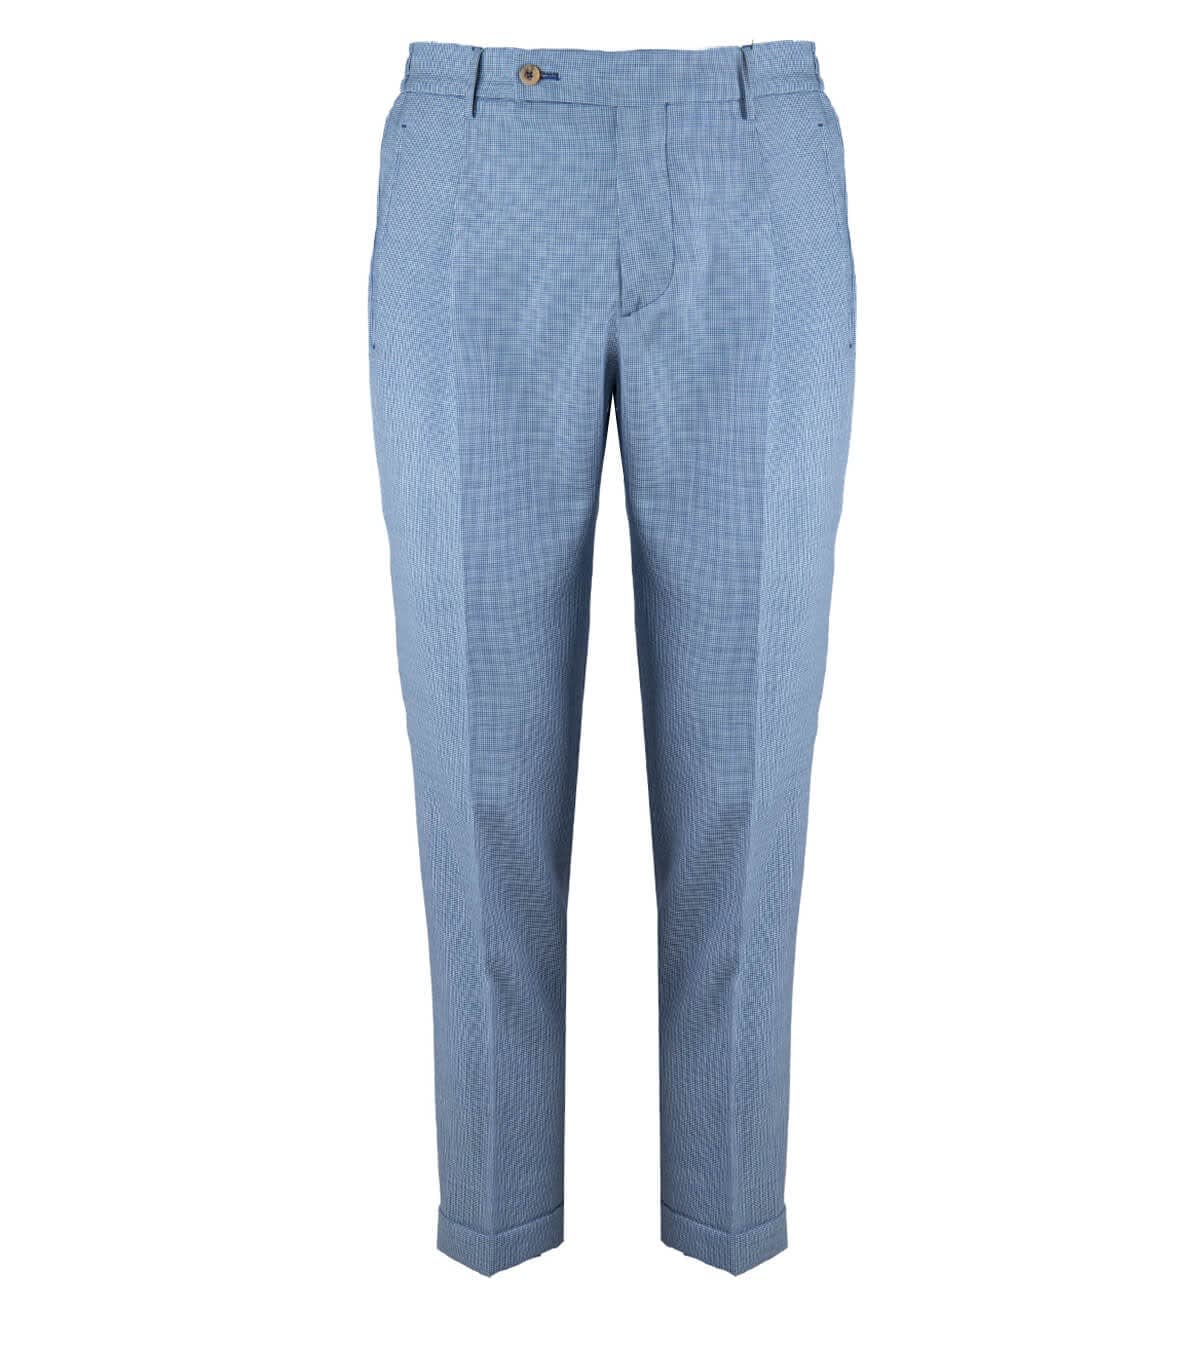 Berwich Retro Elax Micro Houndstooth Light Blue Trousers